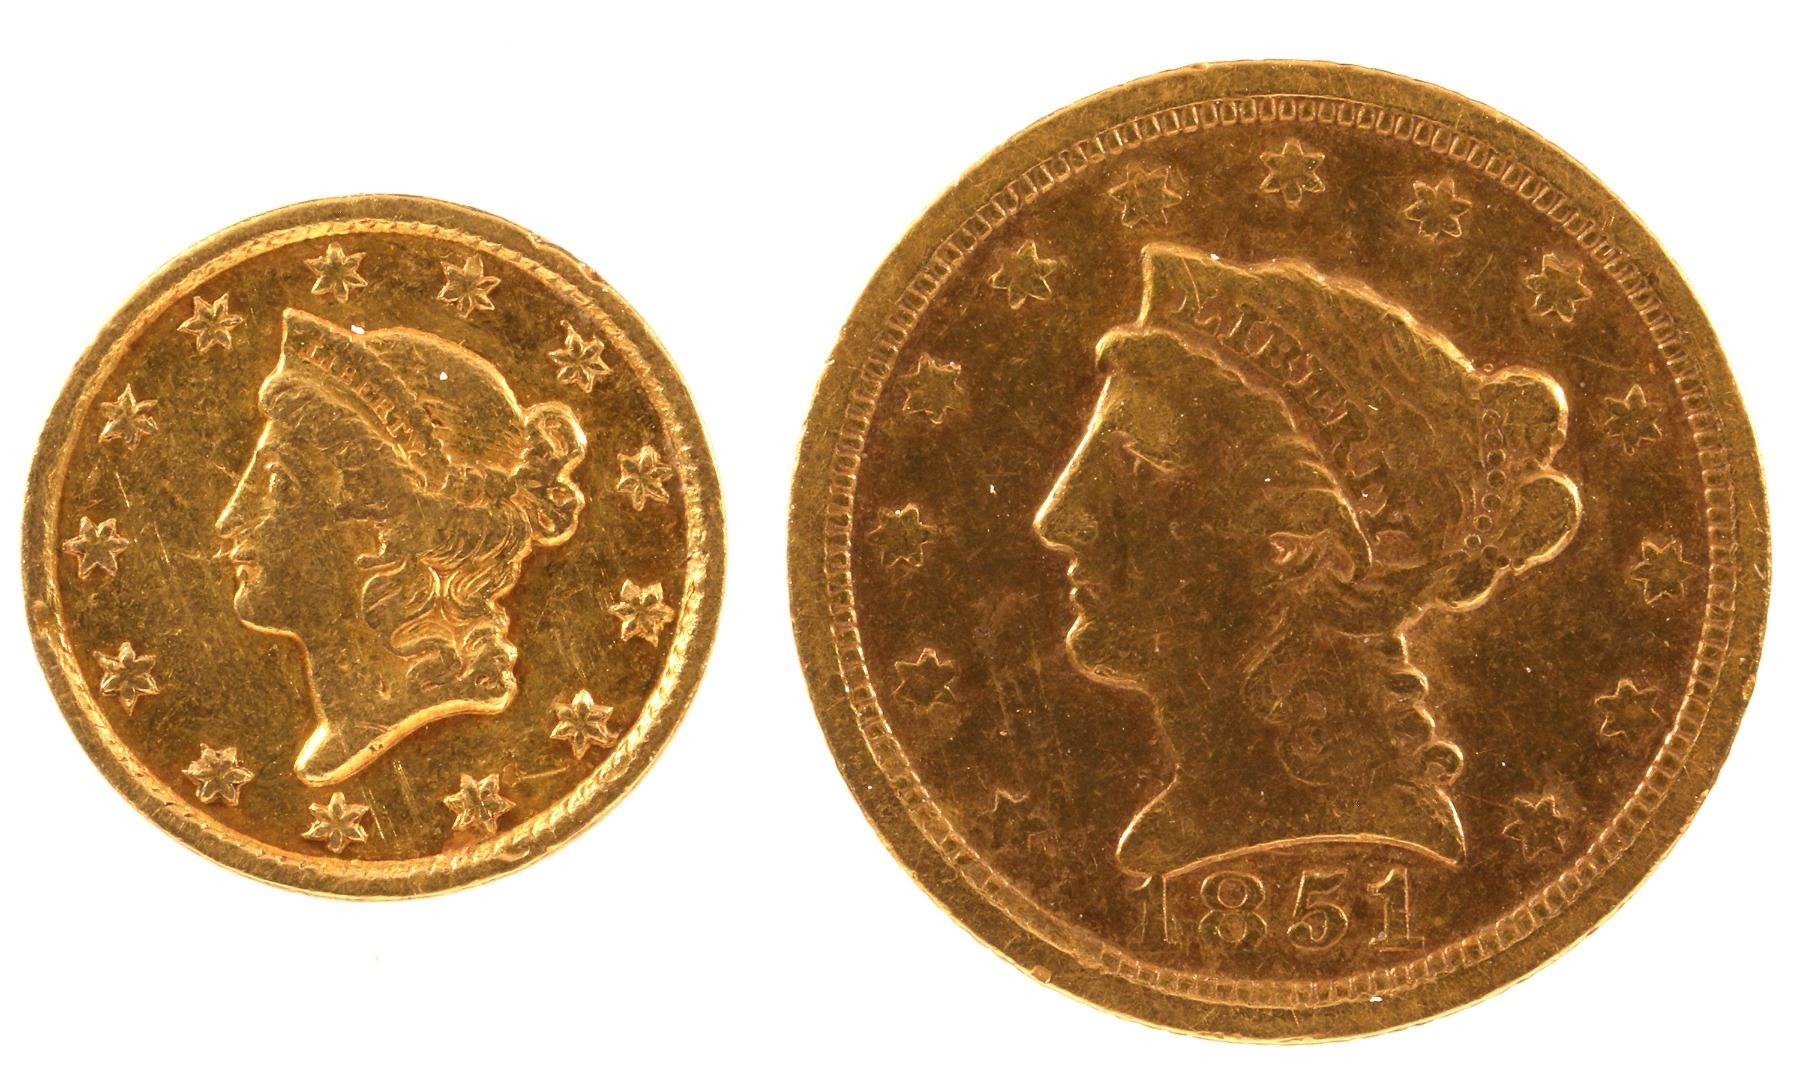 Two gold coins from the U.S. Mint in Charlotte, N.C., offered together: an 1850-C $1 gold coin graded VF-EF condition, and an 1851-C $2 ½ gold coin, graded F-VF, $3,374